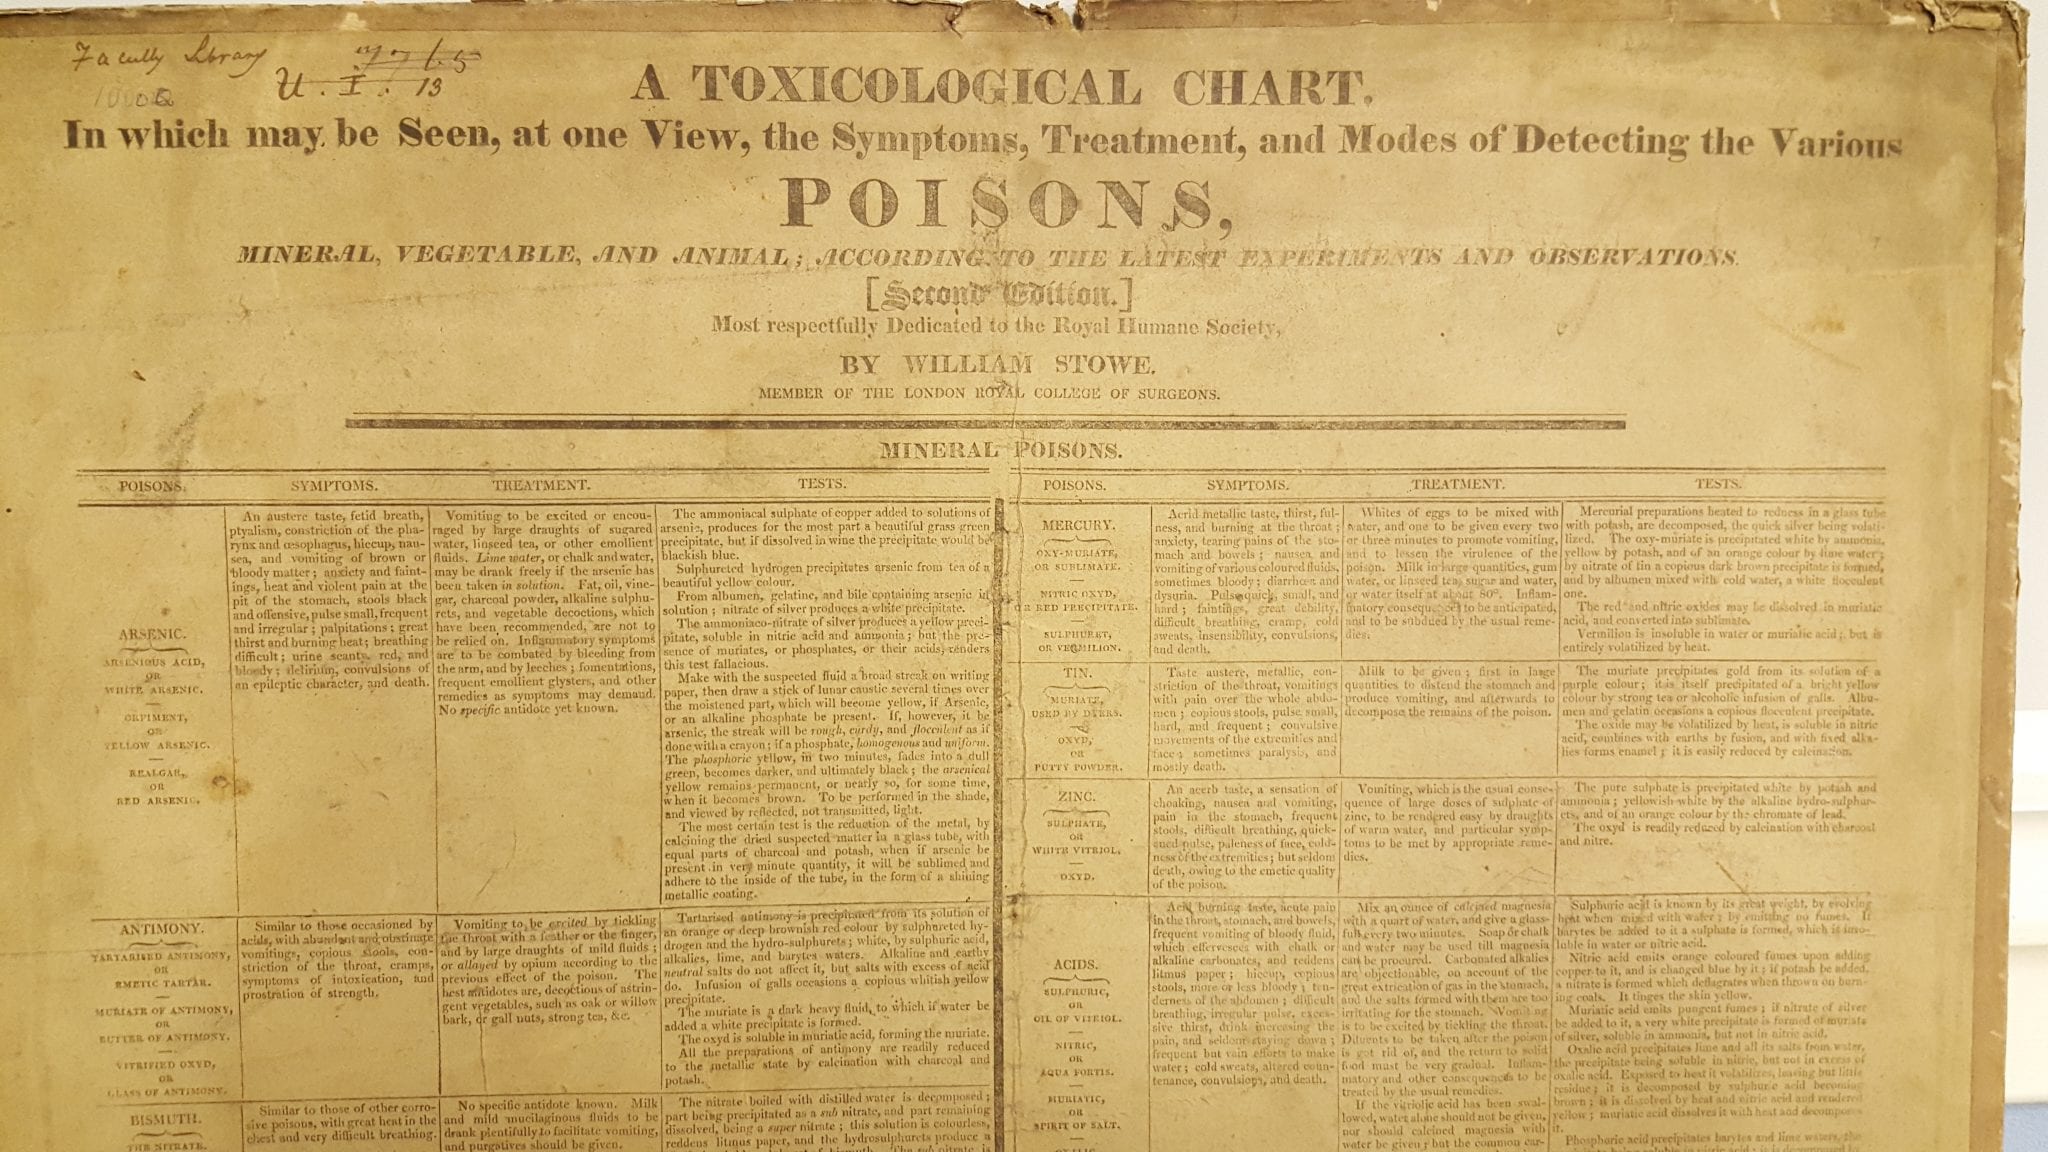 A Toxicological Chart by William Stowe (2nd edition)